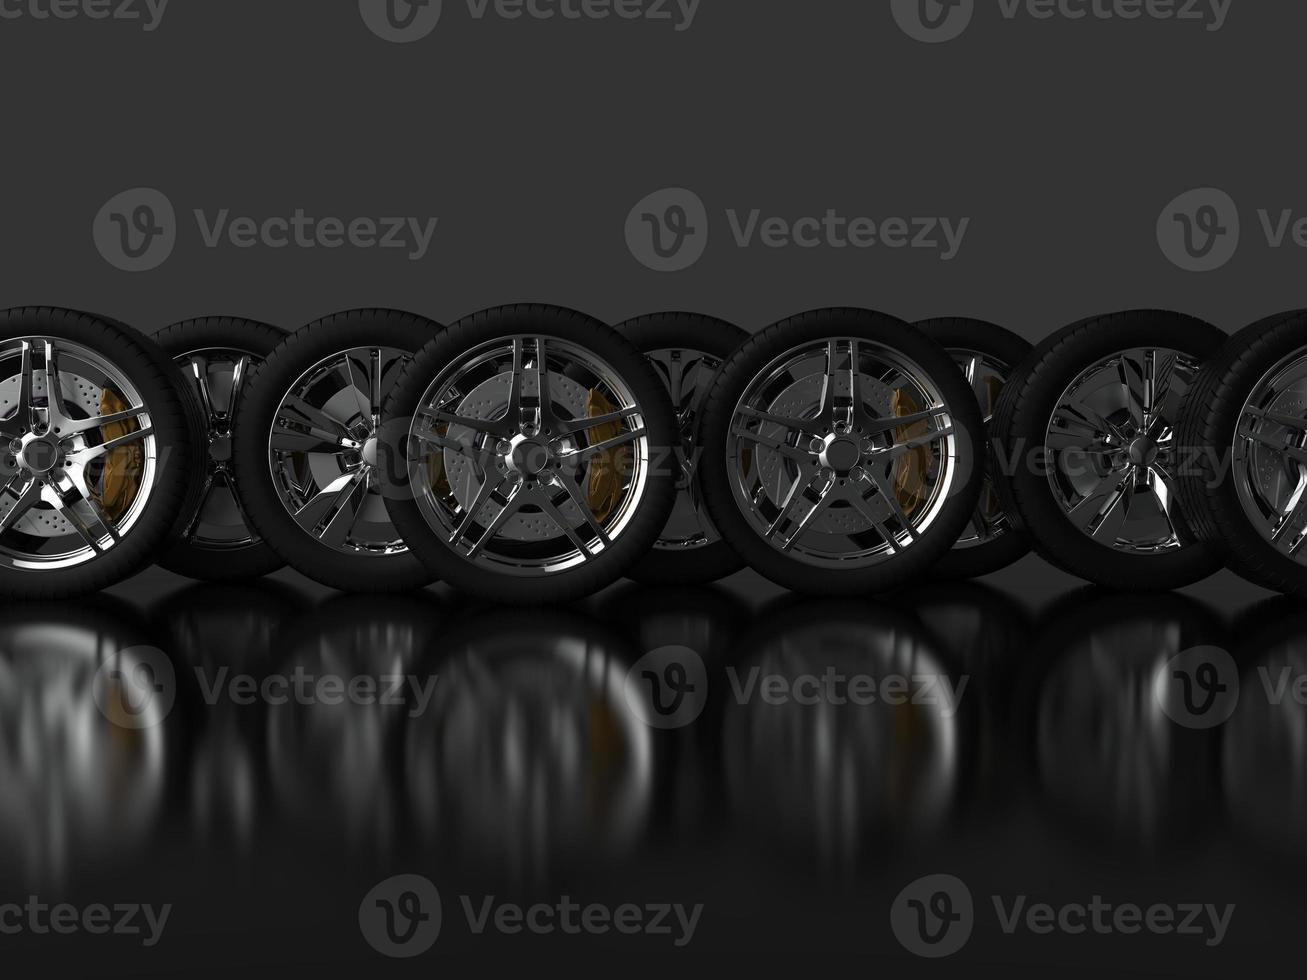 auto wheel with chrome disks close-up on a dark background. 3d render photo